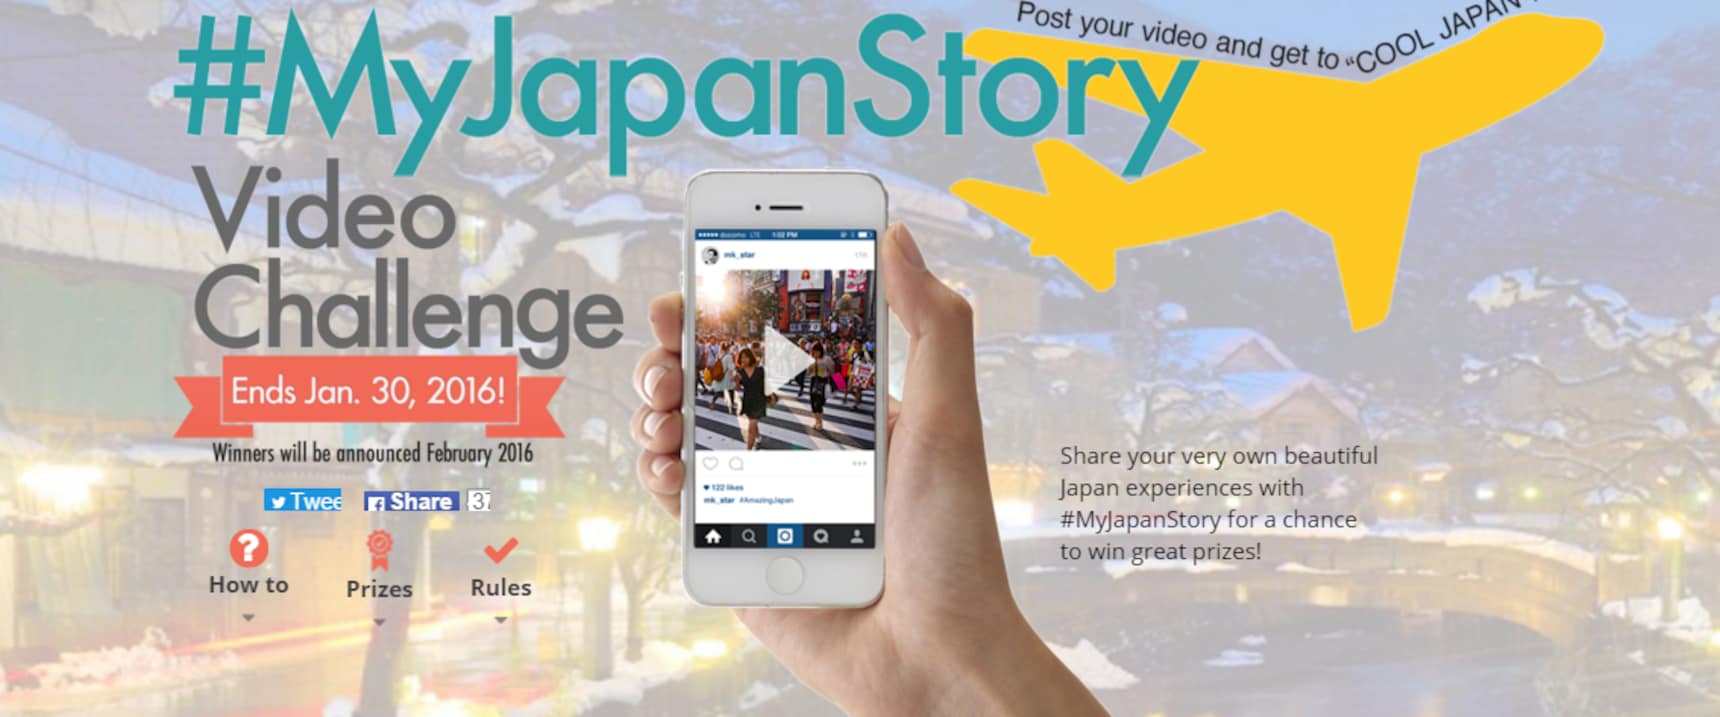 Send in Your Videos to Revisit Japan!